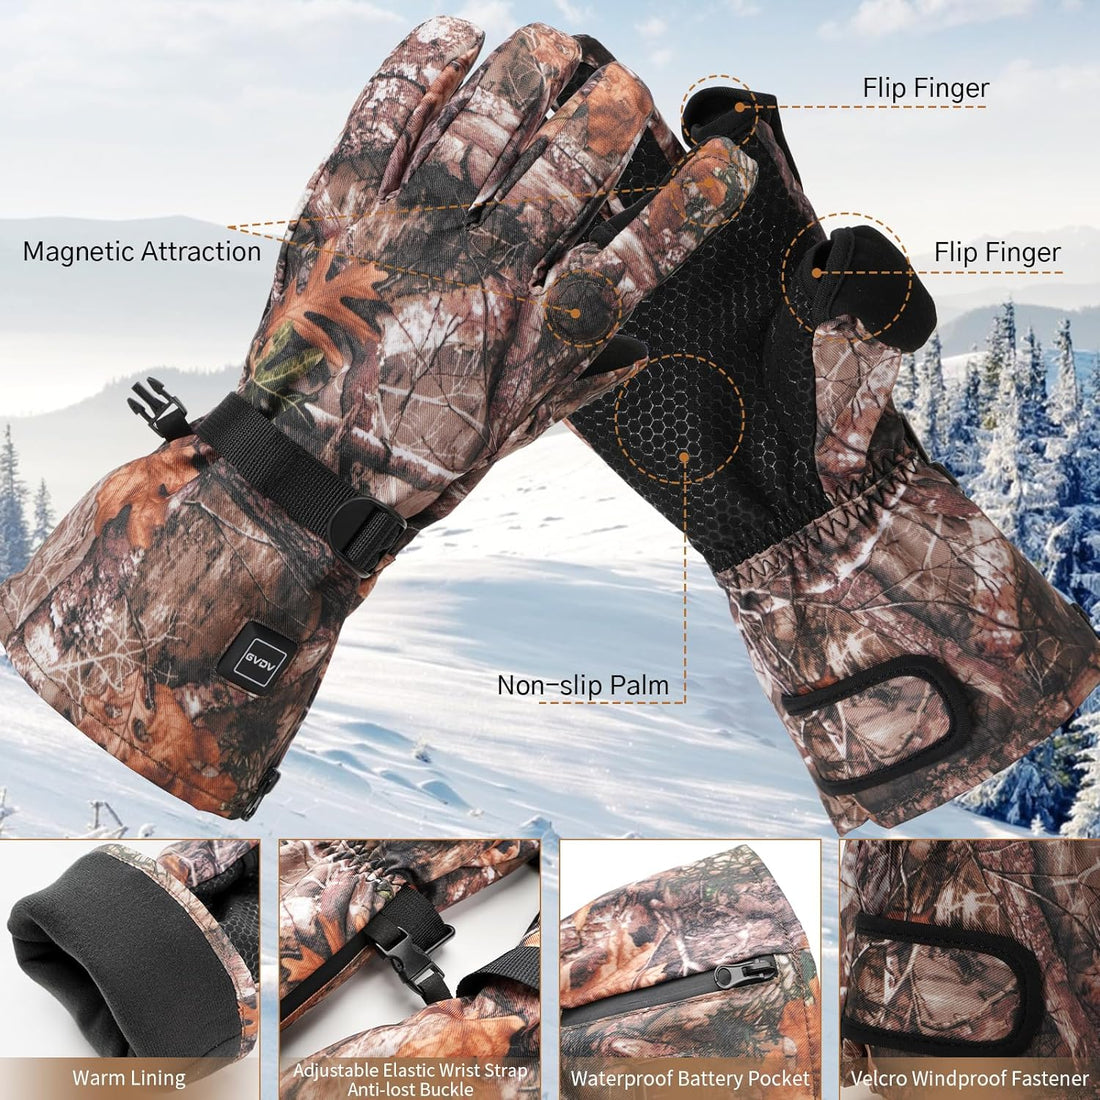 GVDV Hunting Heated Gloves for Men, 7.4V 3400mAh Rechargeable Touch Screen Heating Gloves with 2 Battery Packs, Winter Hand Warmers Glove for Outdoor Hunting Fishing Shooting Hiking, Camouflage, L